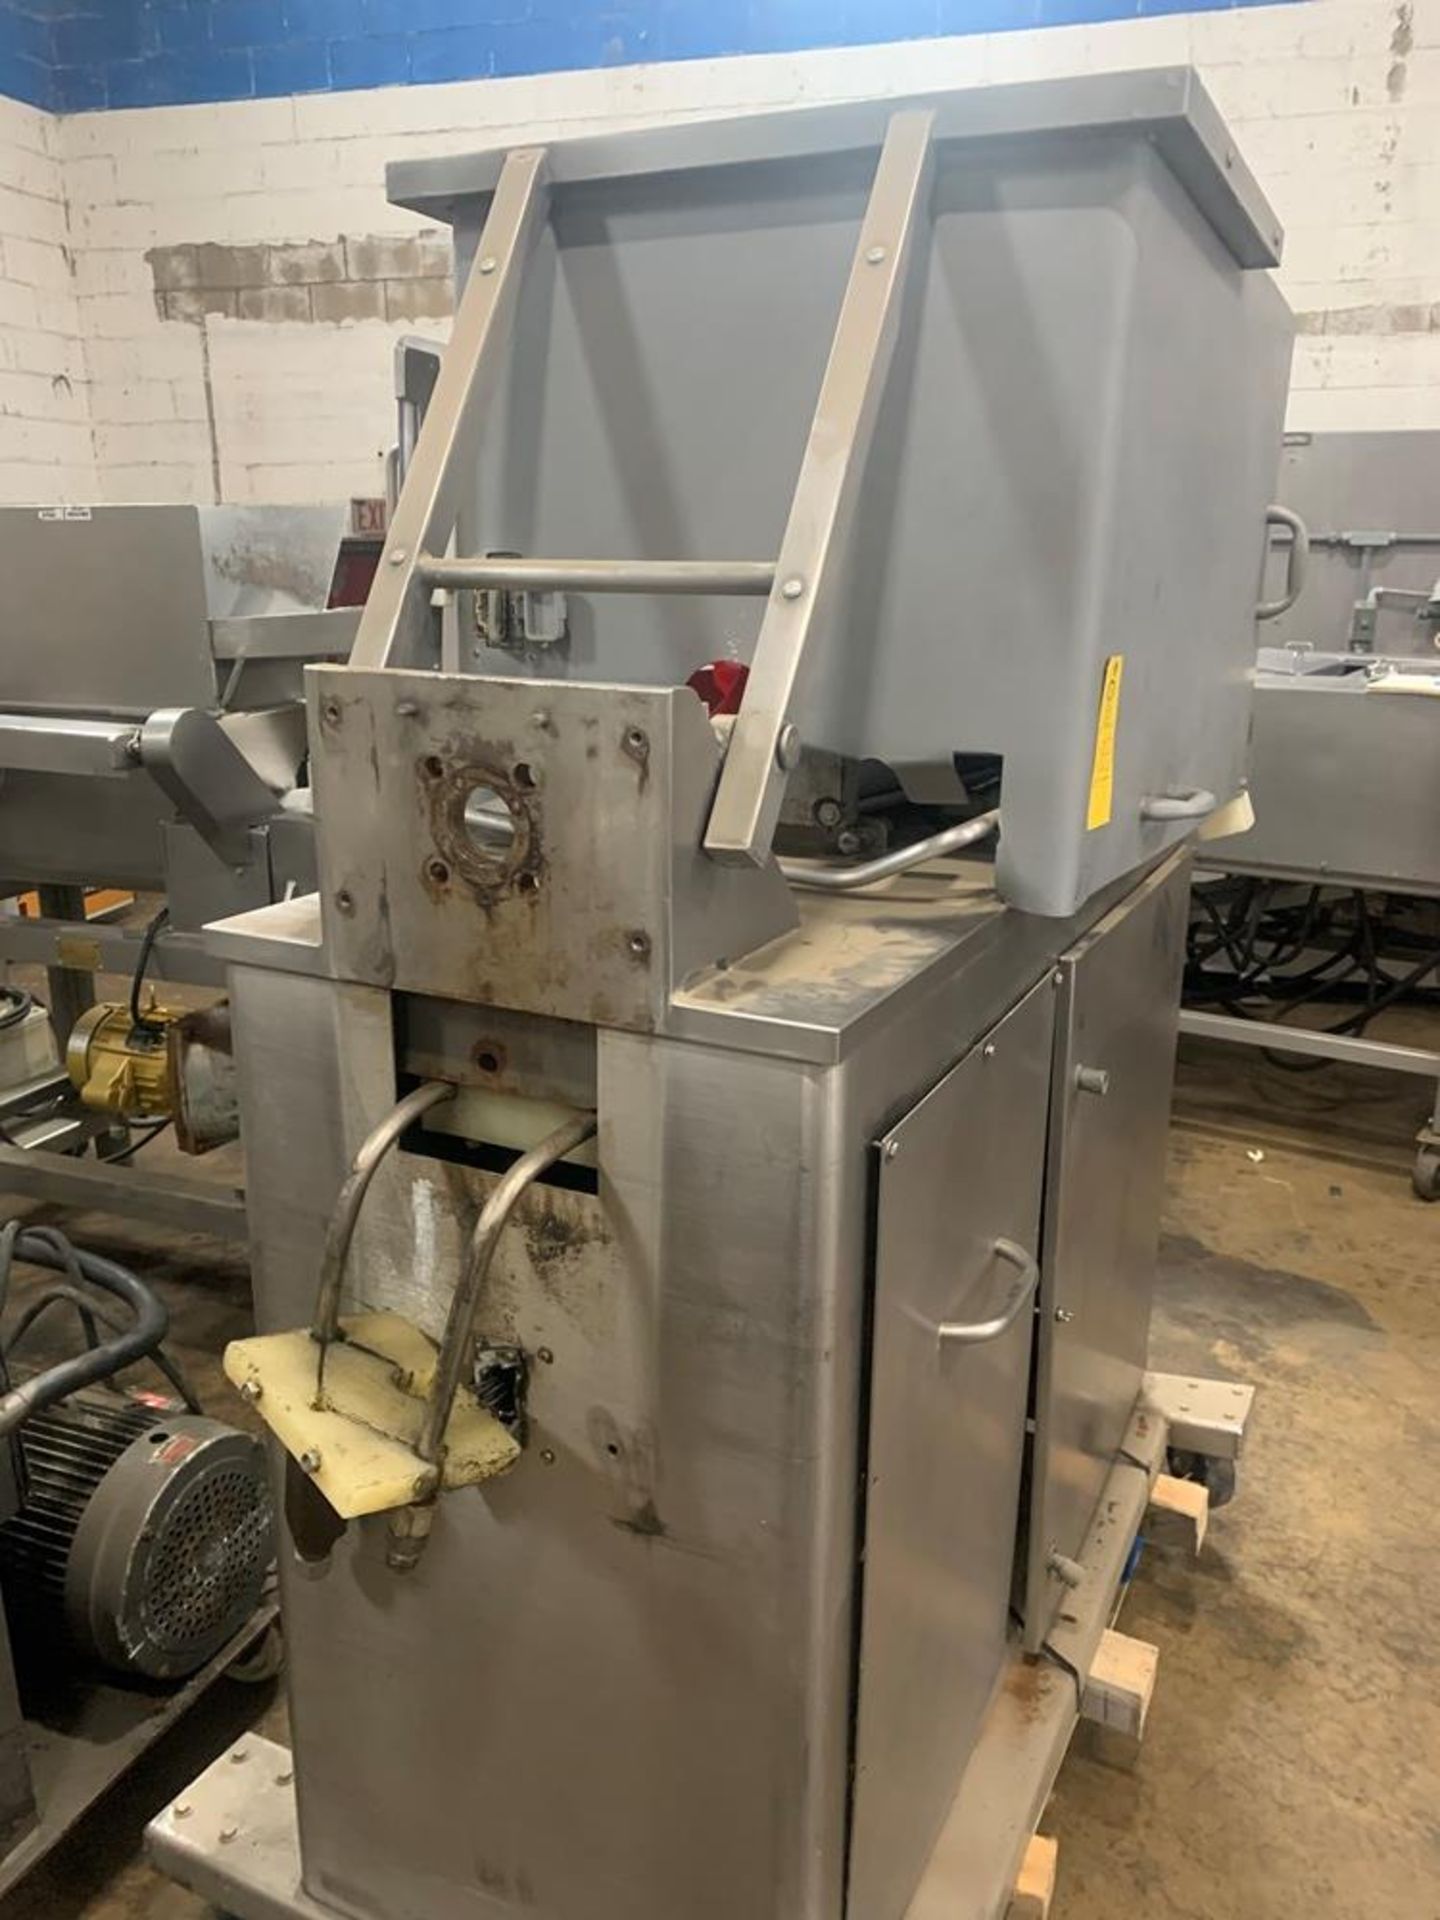 Bettcher Mdl. 75 Press with power pack for parts (Located in Plano, IL) - Image 3 of 11